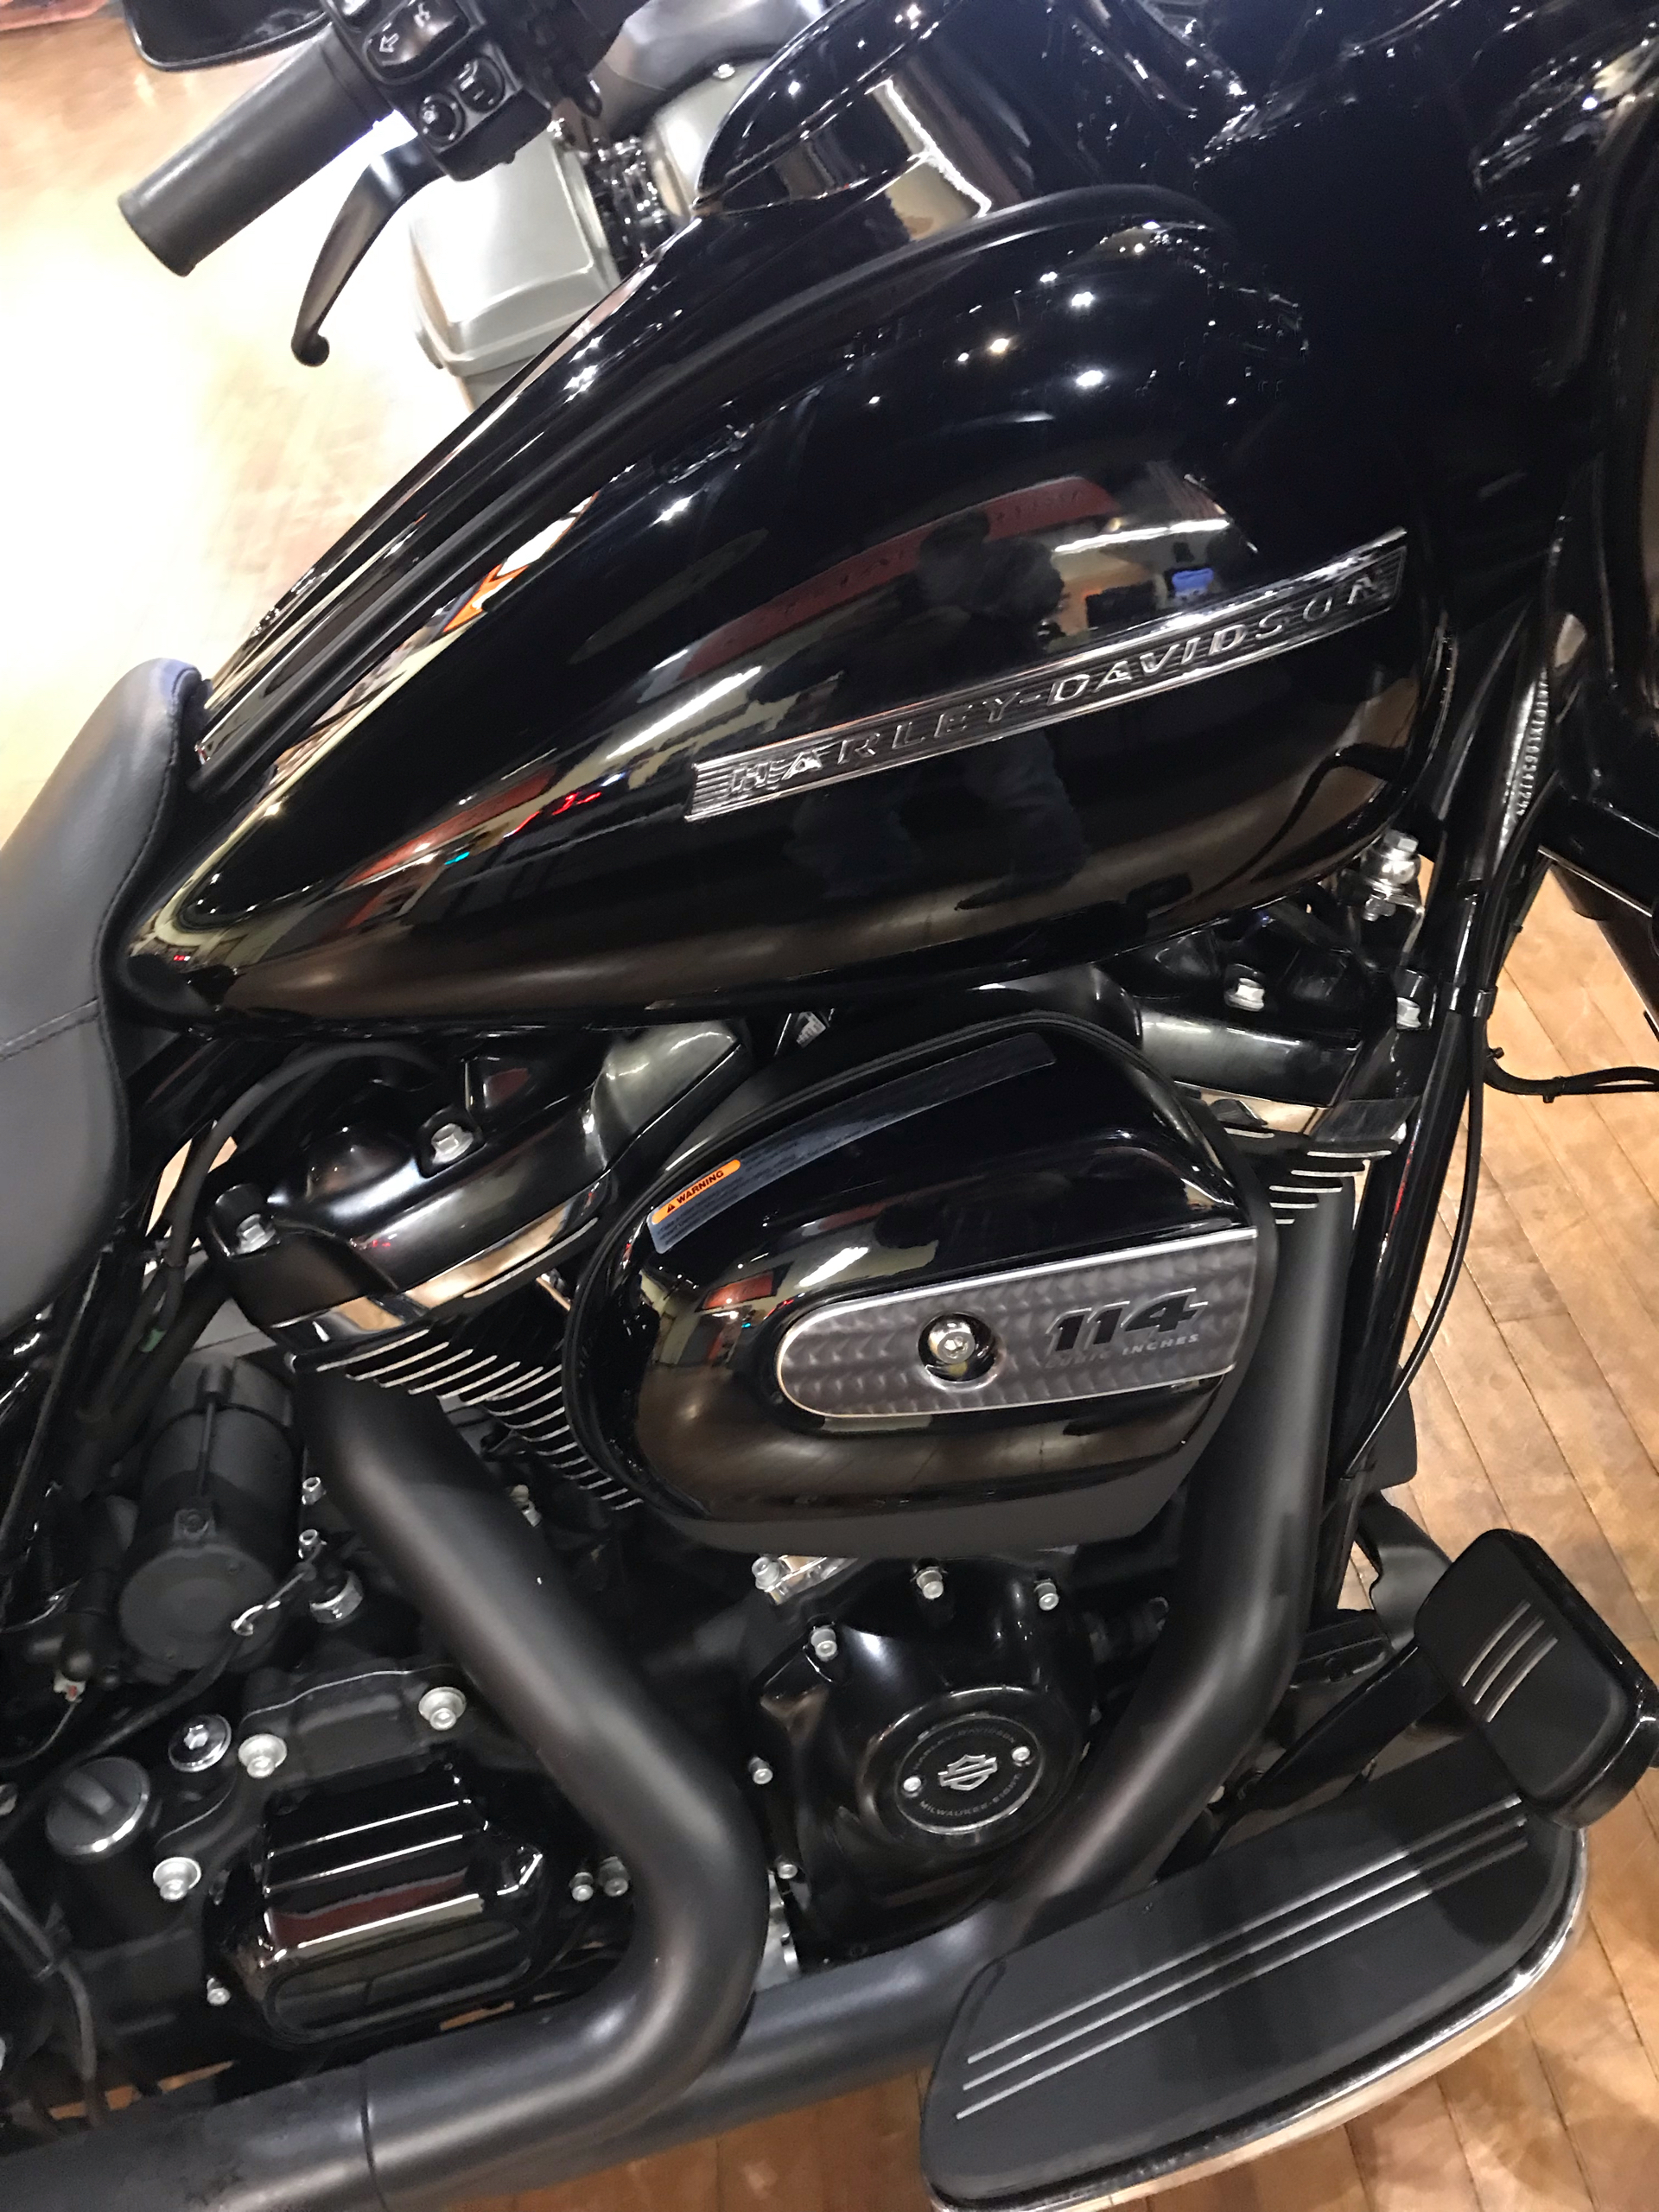 2020 Harley-Davidson ROADGLIDE SPECIAL in Lakewood, New Jersey - Photo 2